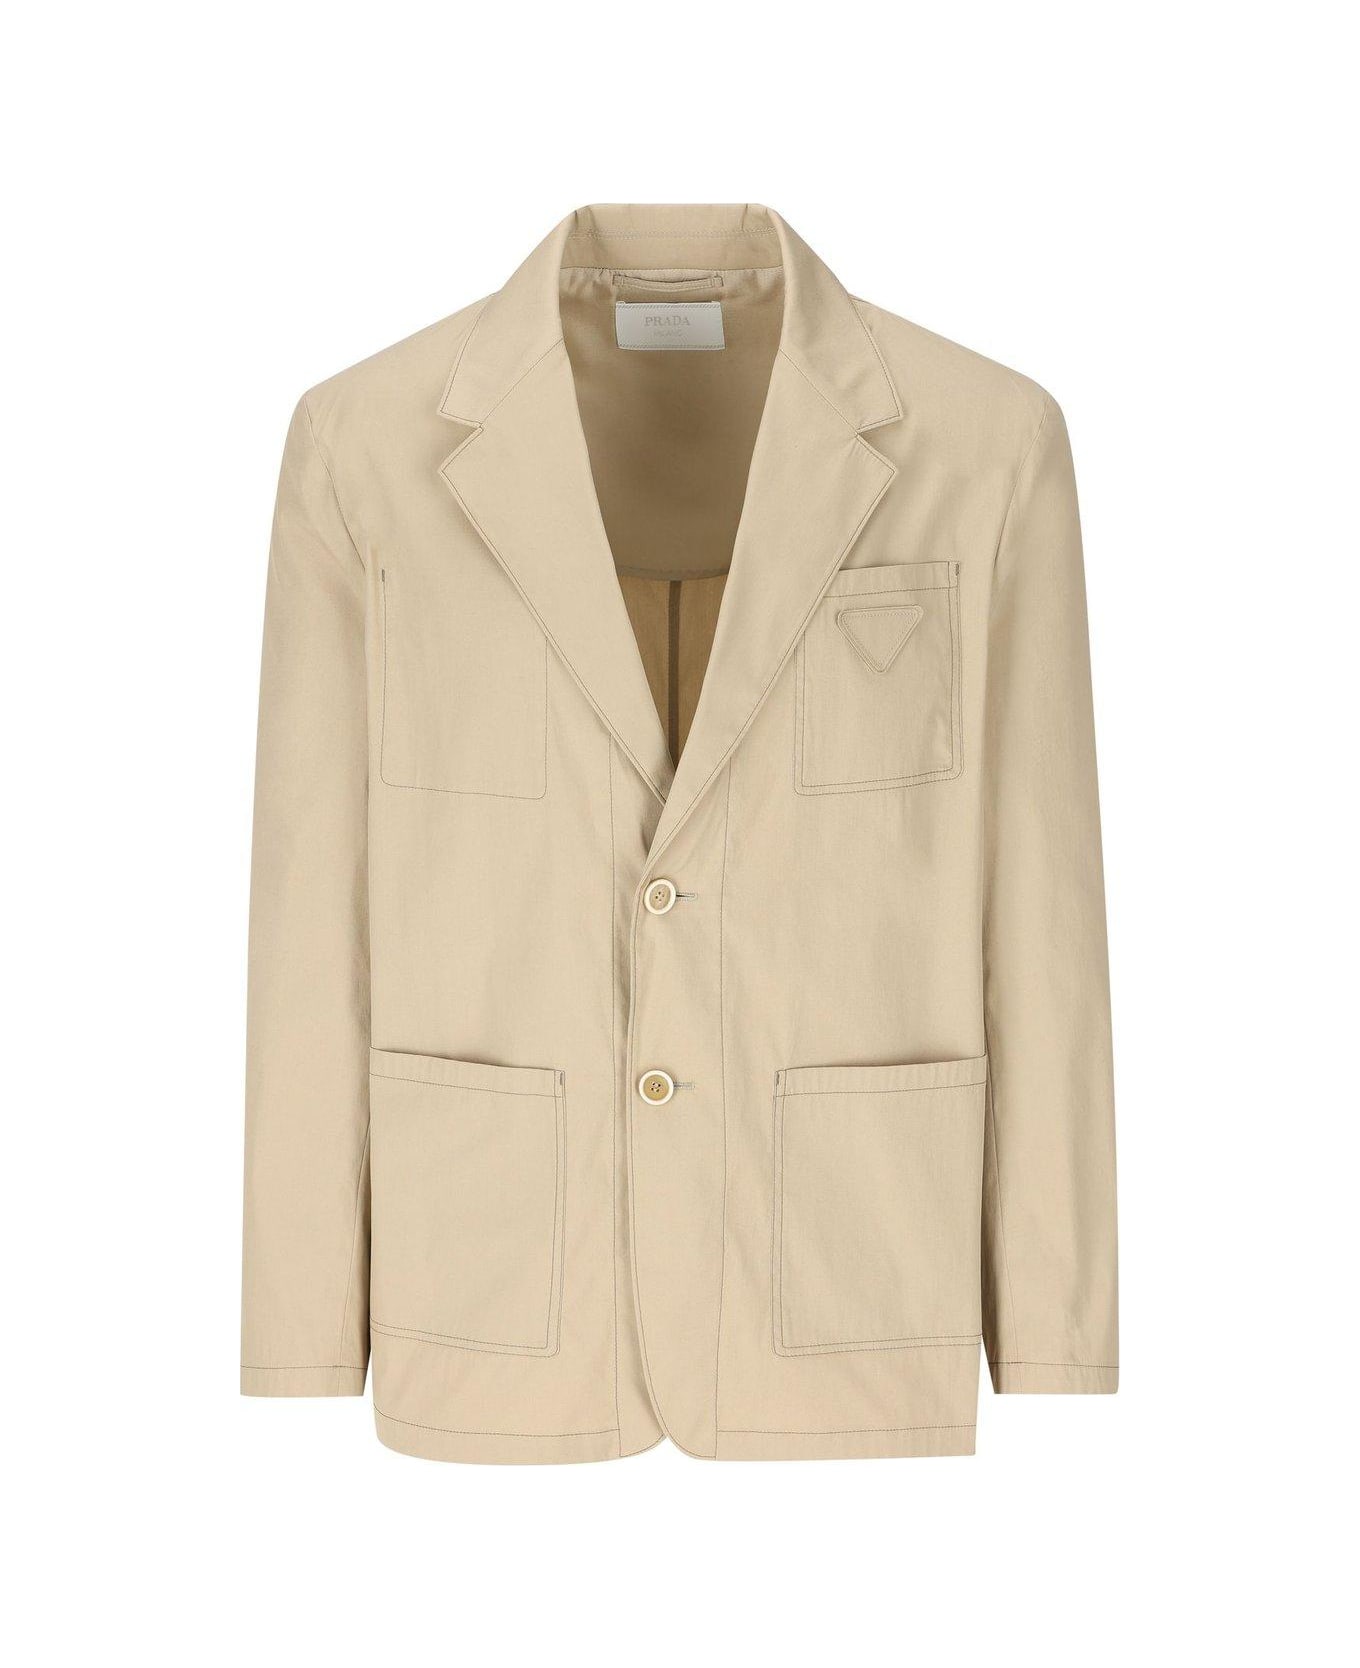 Prada Triangle Patch Button-up Jacket - Rope